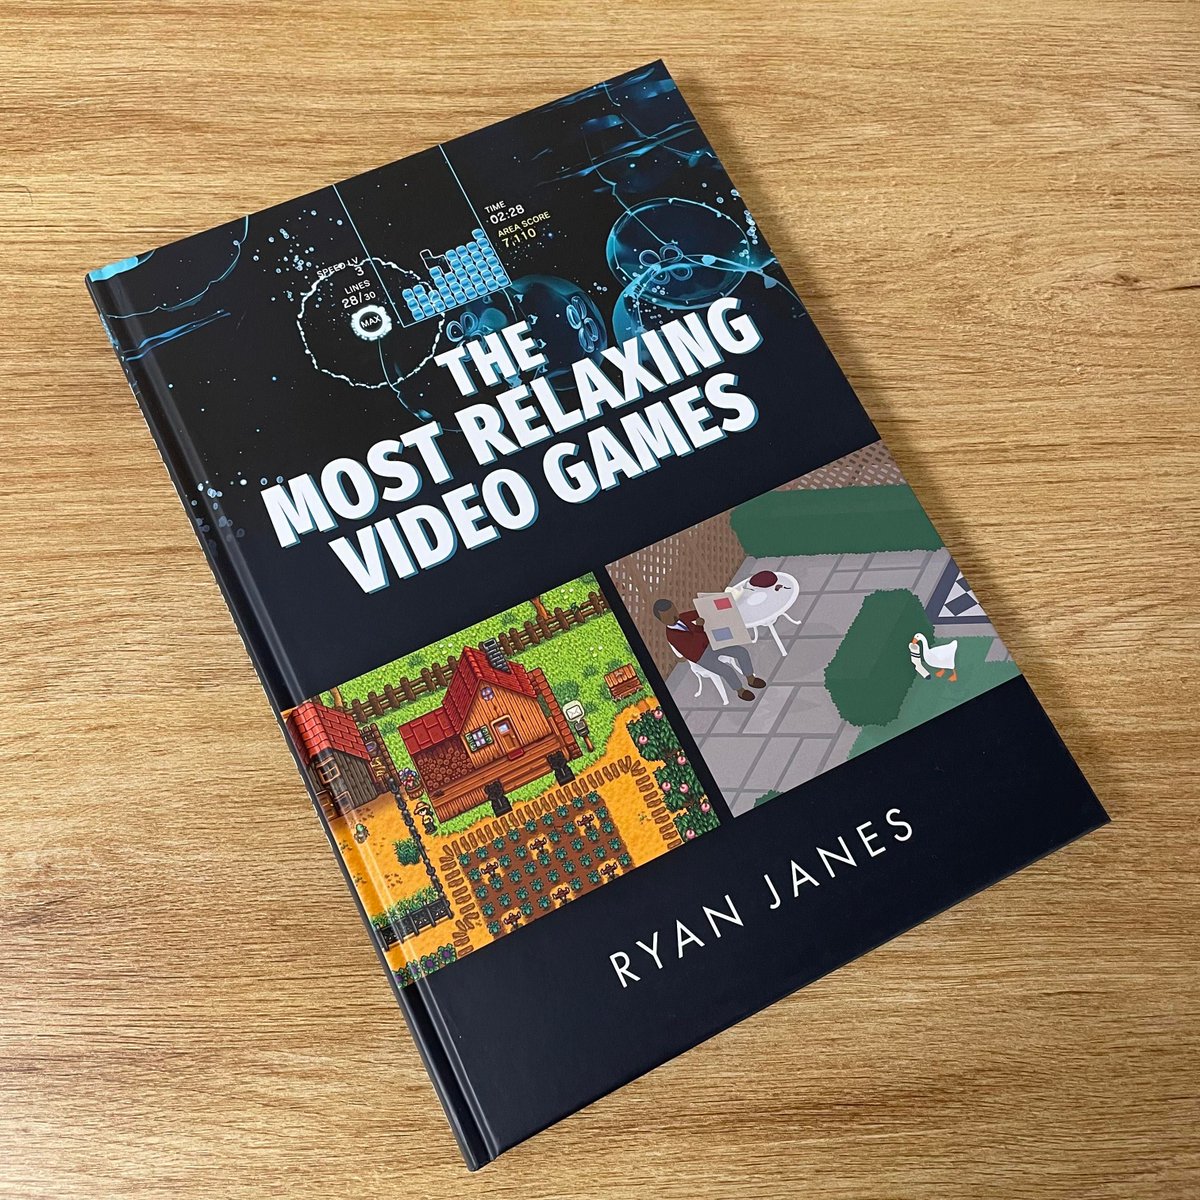 For anyone on the lookout for relaxing games, @ryryjanes has put together a book of the 50 most relaxing games—and Unpacking is included! Check it out if you want to take a deep dive into what relaxing can encompass for video games 📖